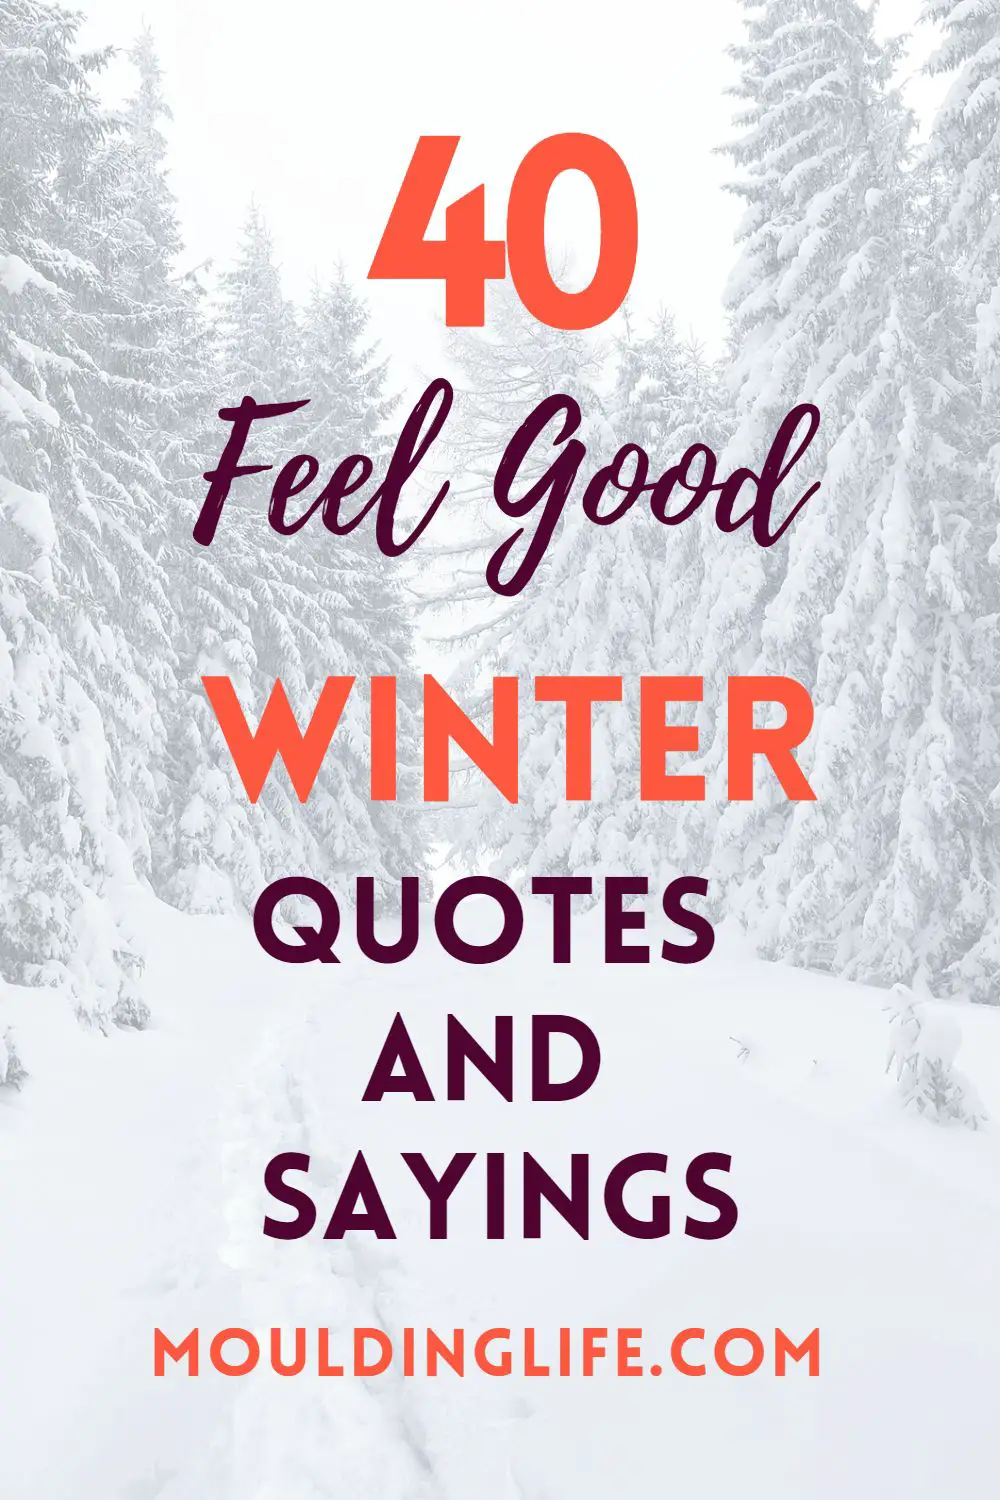 40 Feel Good Winter Quotes and Sayings - Moulding Life